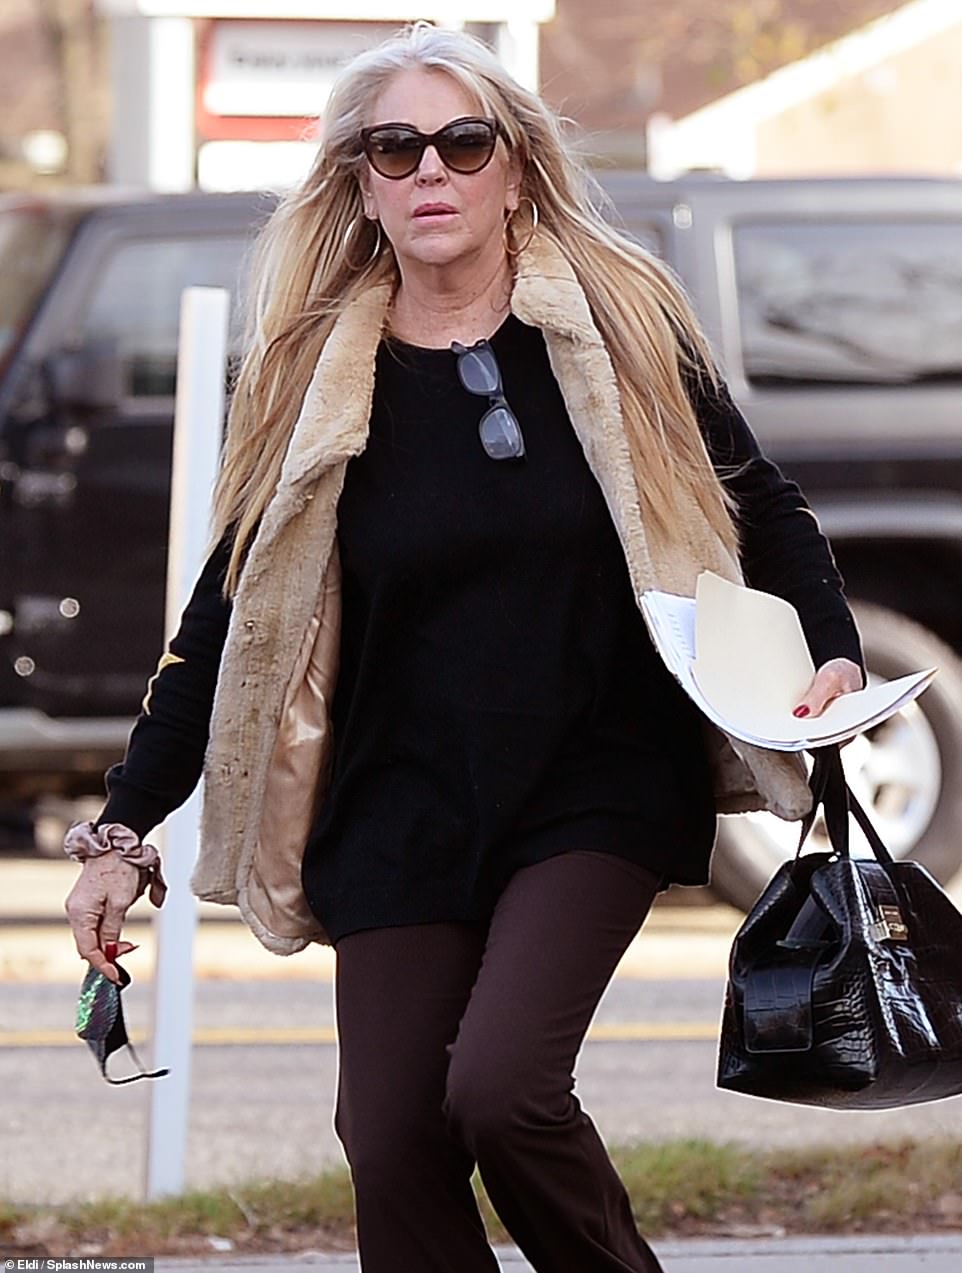 Lindsay Lohan's mom is pictured after being released from prison for a drunk hit and run crash 1